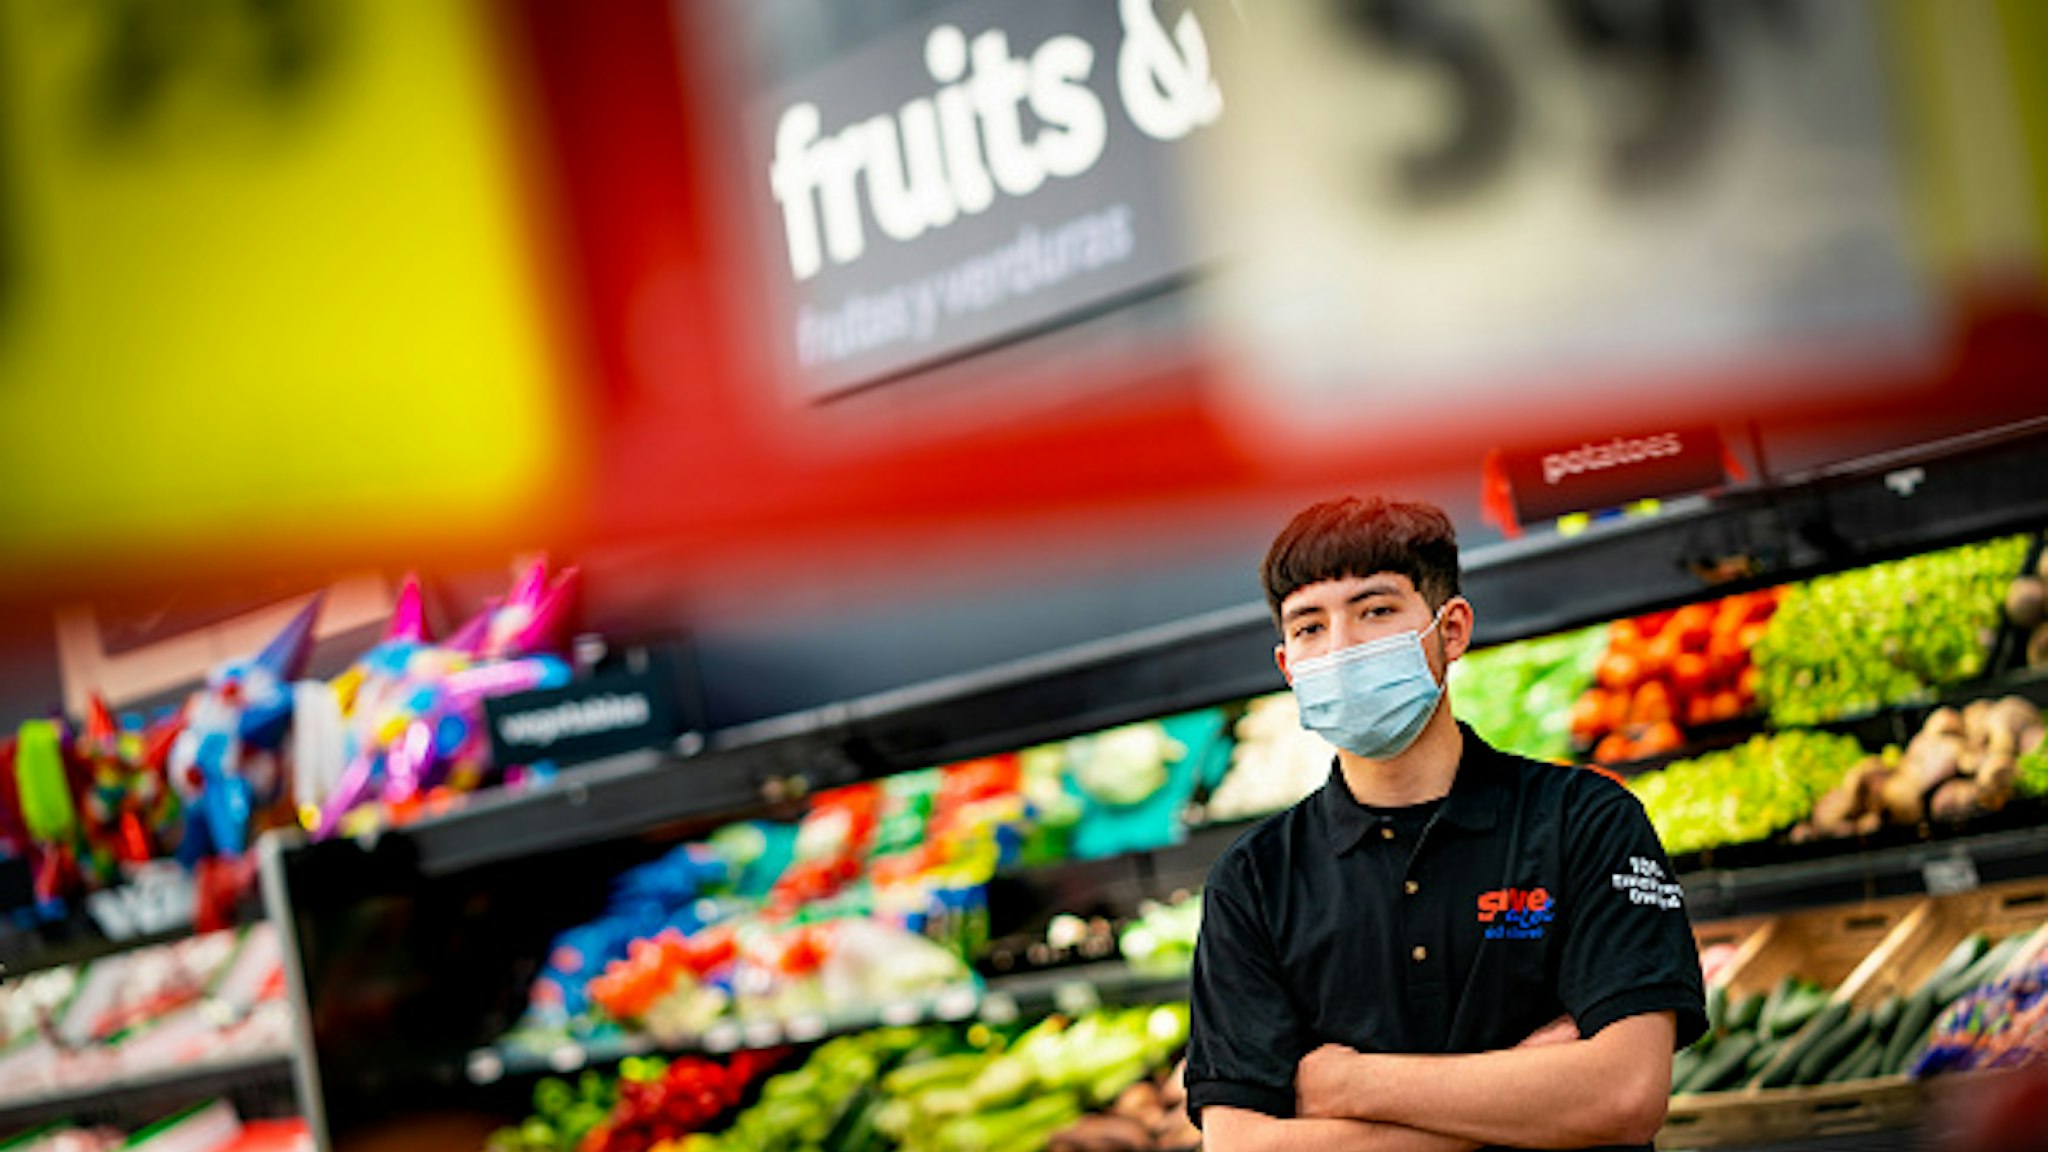 DENVER, CO - MAY, 13: Jael Marquez, 17, poses for a portrait inside the Save-A-Lot grocery store on May 13th in Denver, Colorado. Marquez works as a produce clerk at Save-A-Lot and has been working as an essential worker during the coronavirus pandemic.